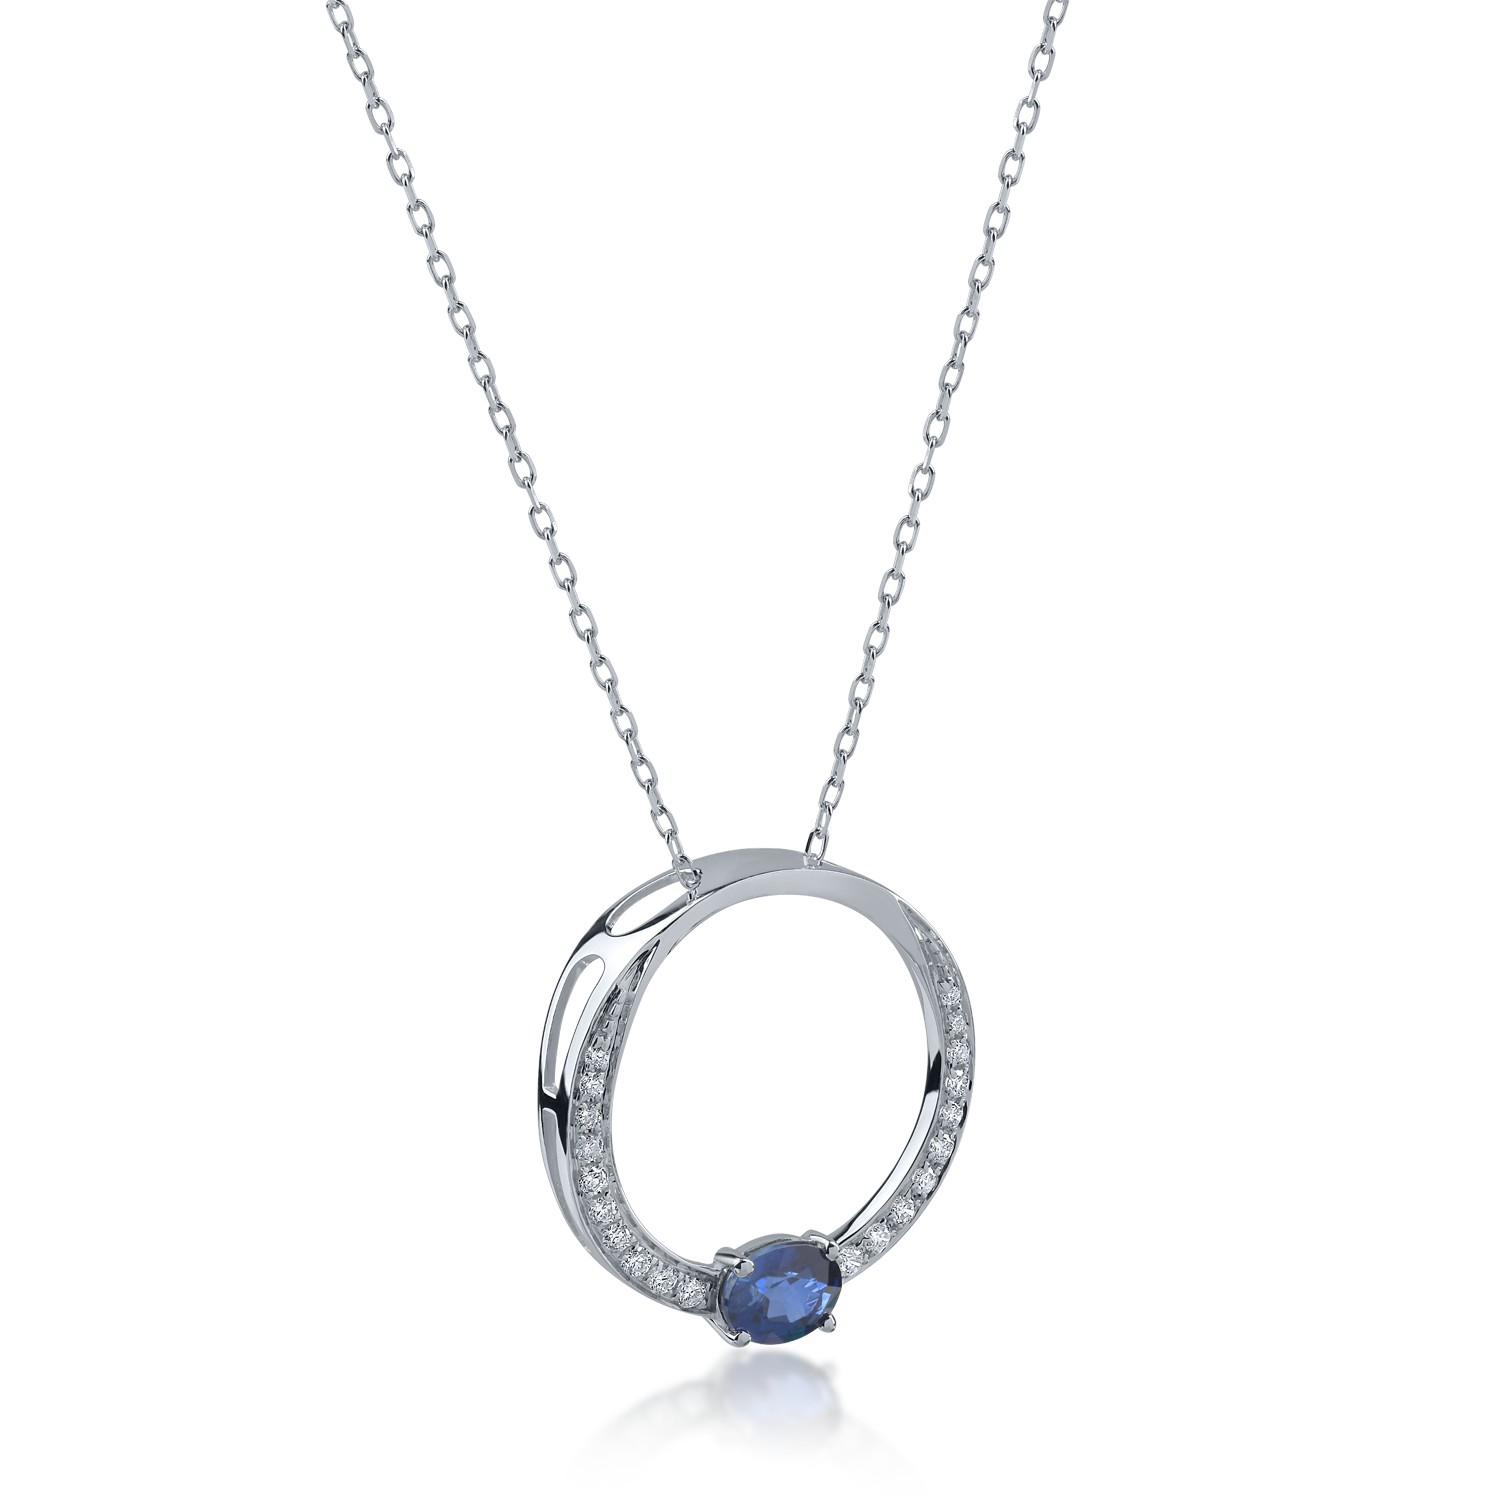 White gold pendant necklace with 0.43ct sapphire and 0.12ct diamonds